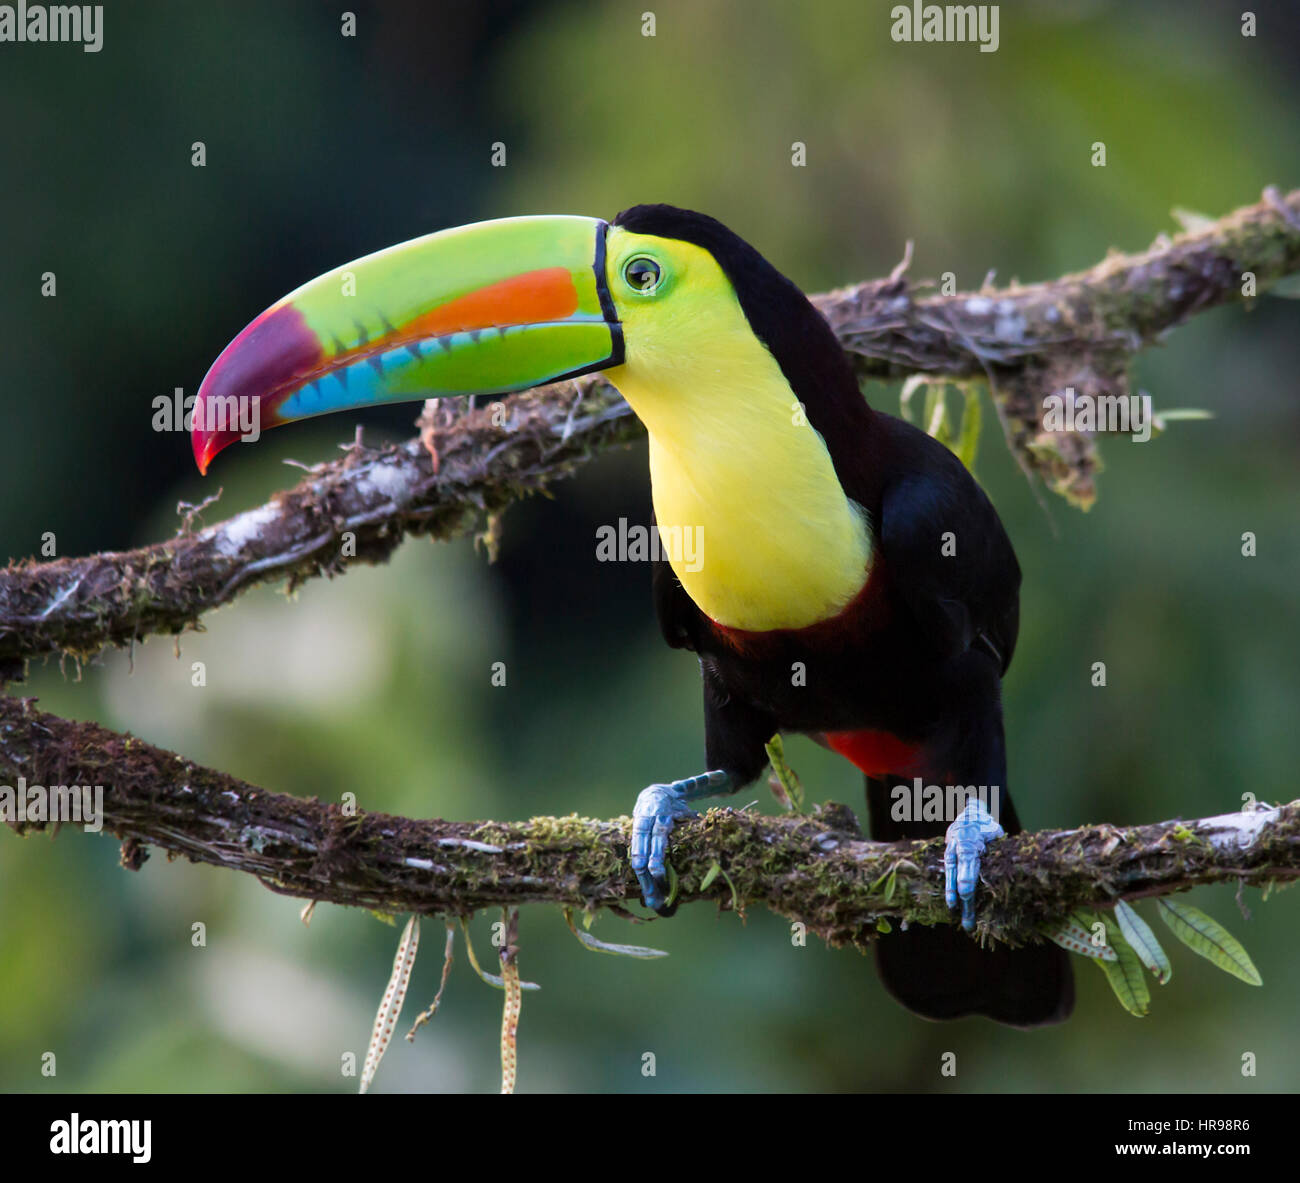 Keel-billed Toucan perched on a branch Stock Photo